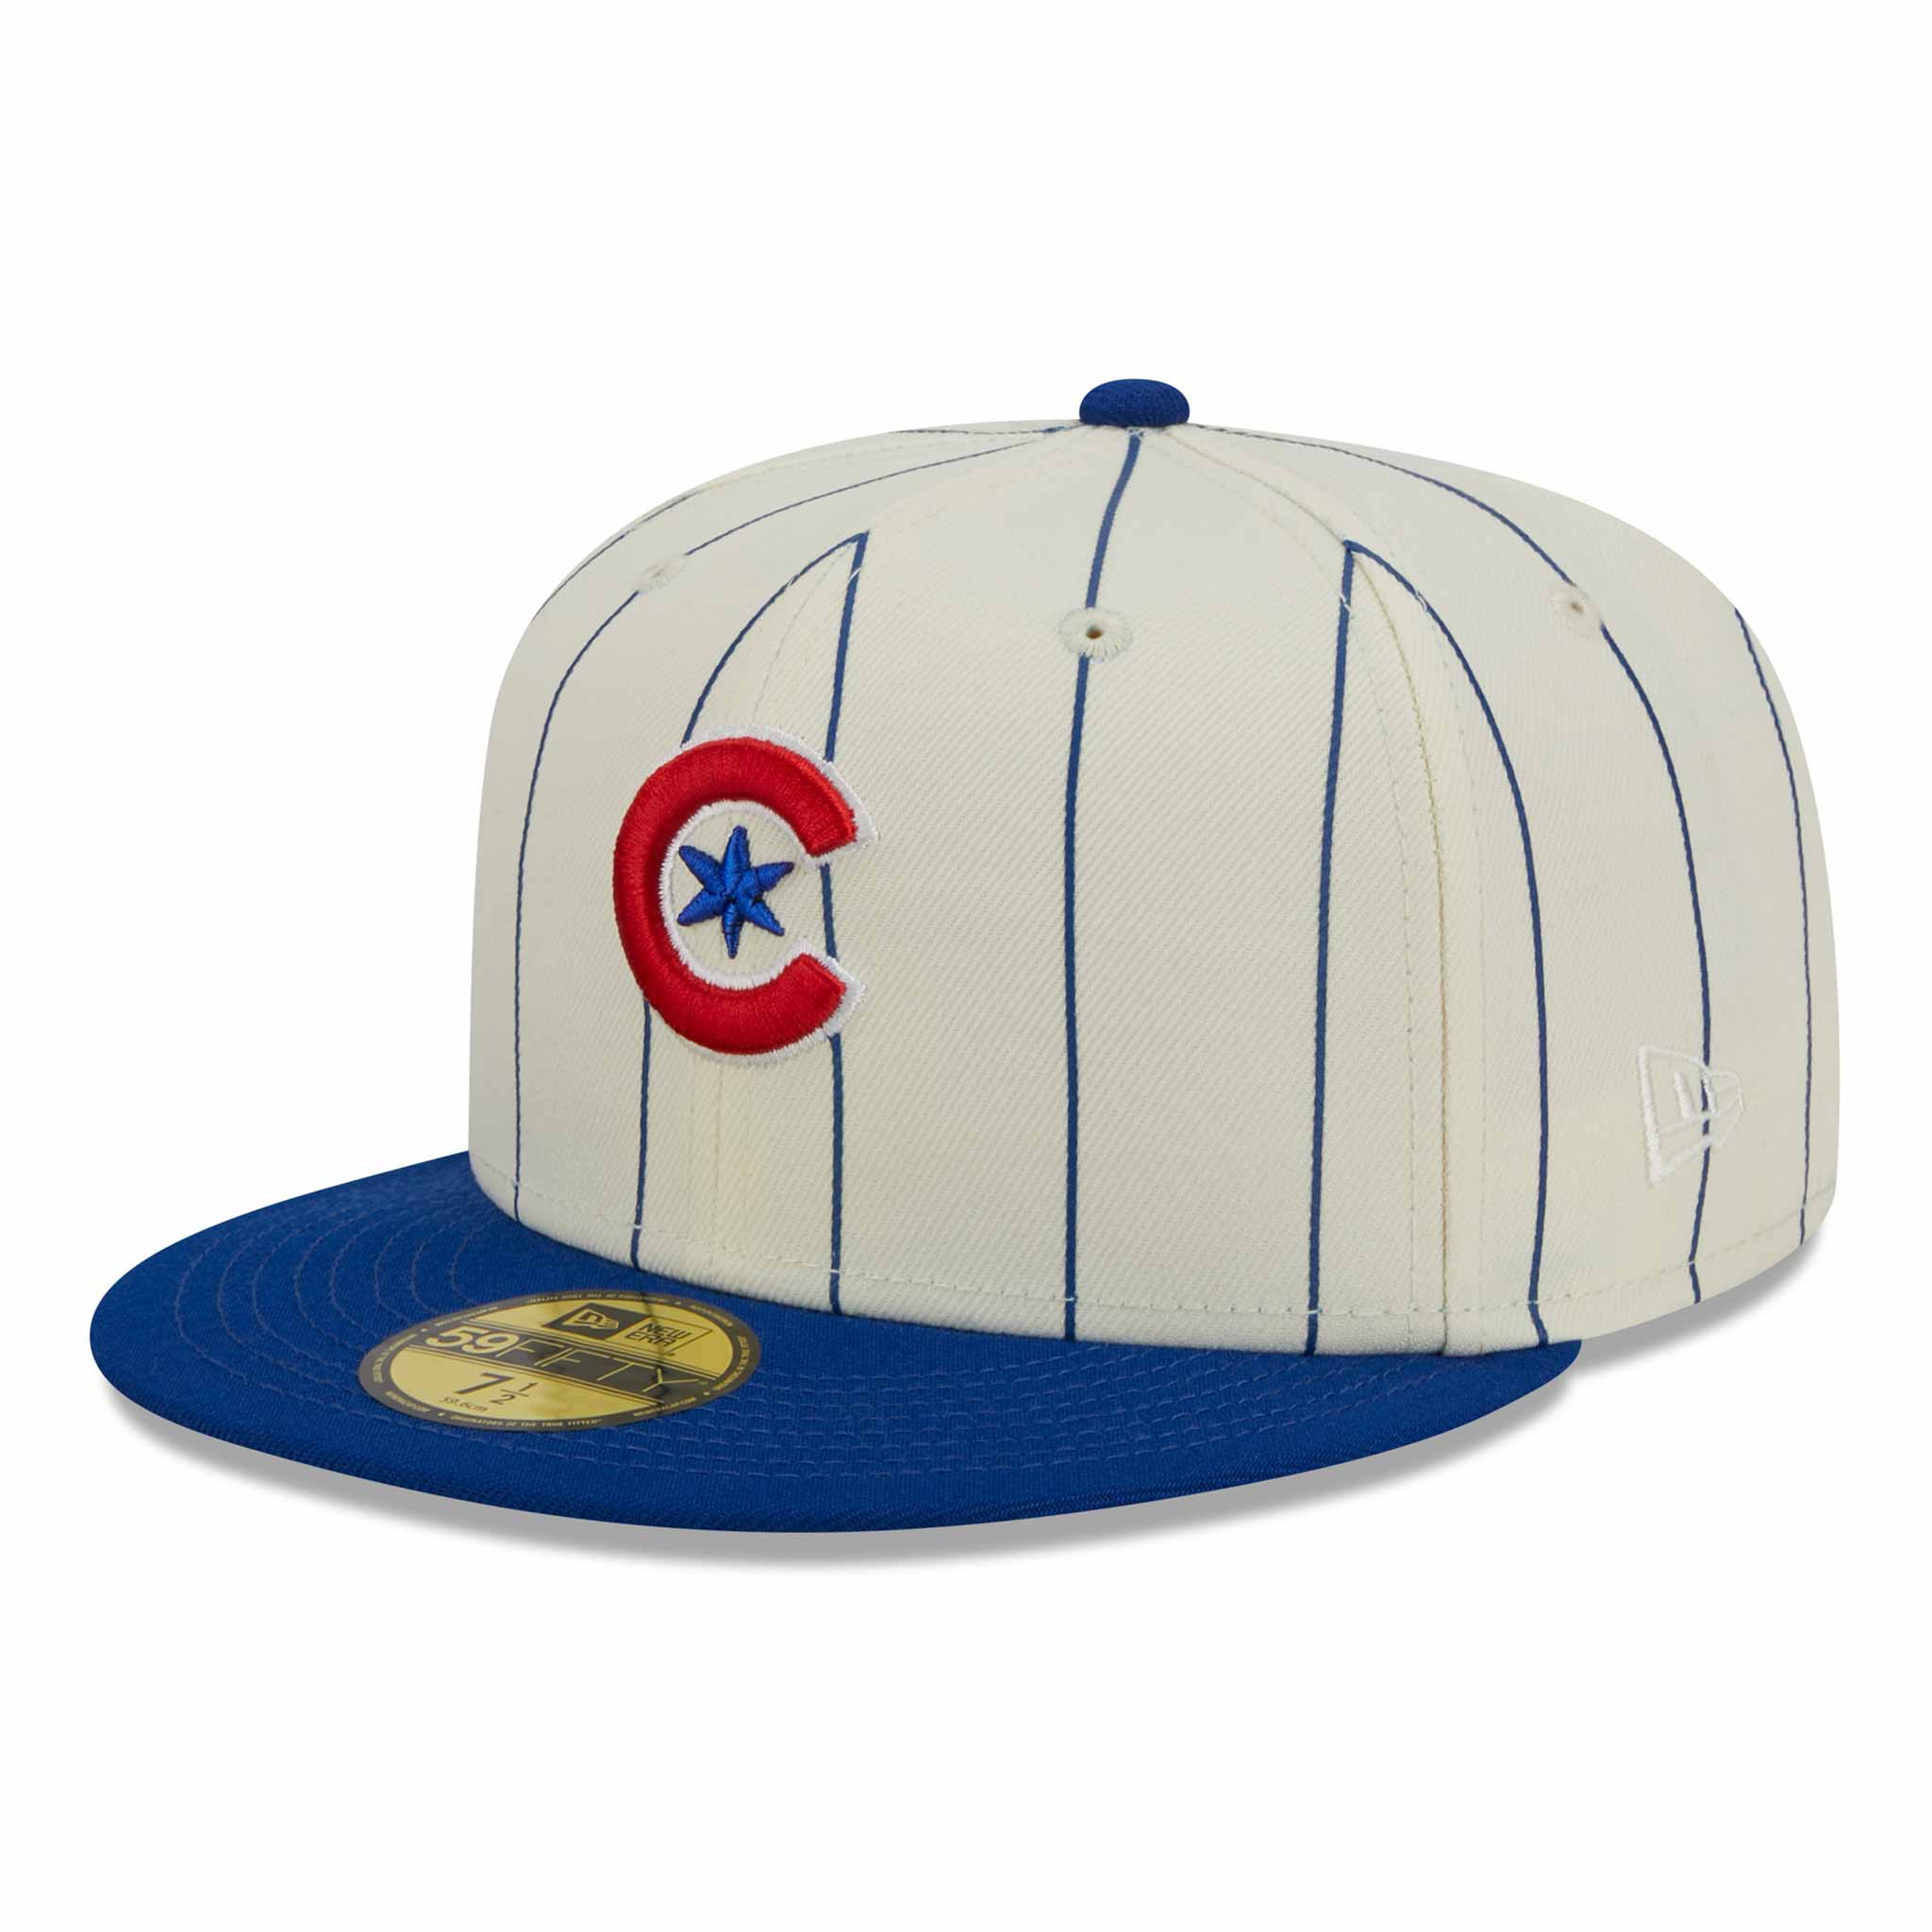 CHICAGO CUBS CITY CONNECT WRIGLEYVILLE NEW ERA FITTED CAP